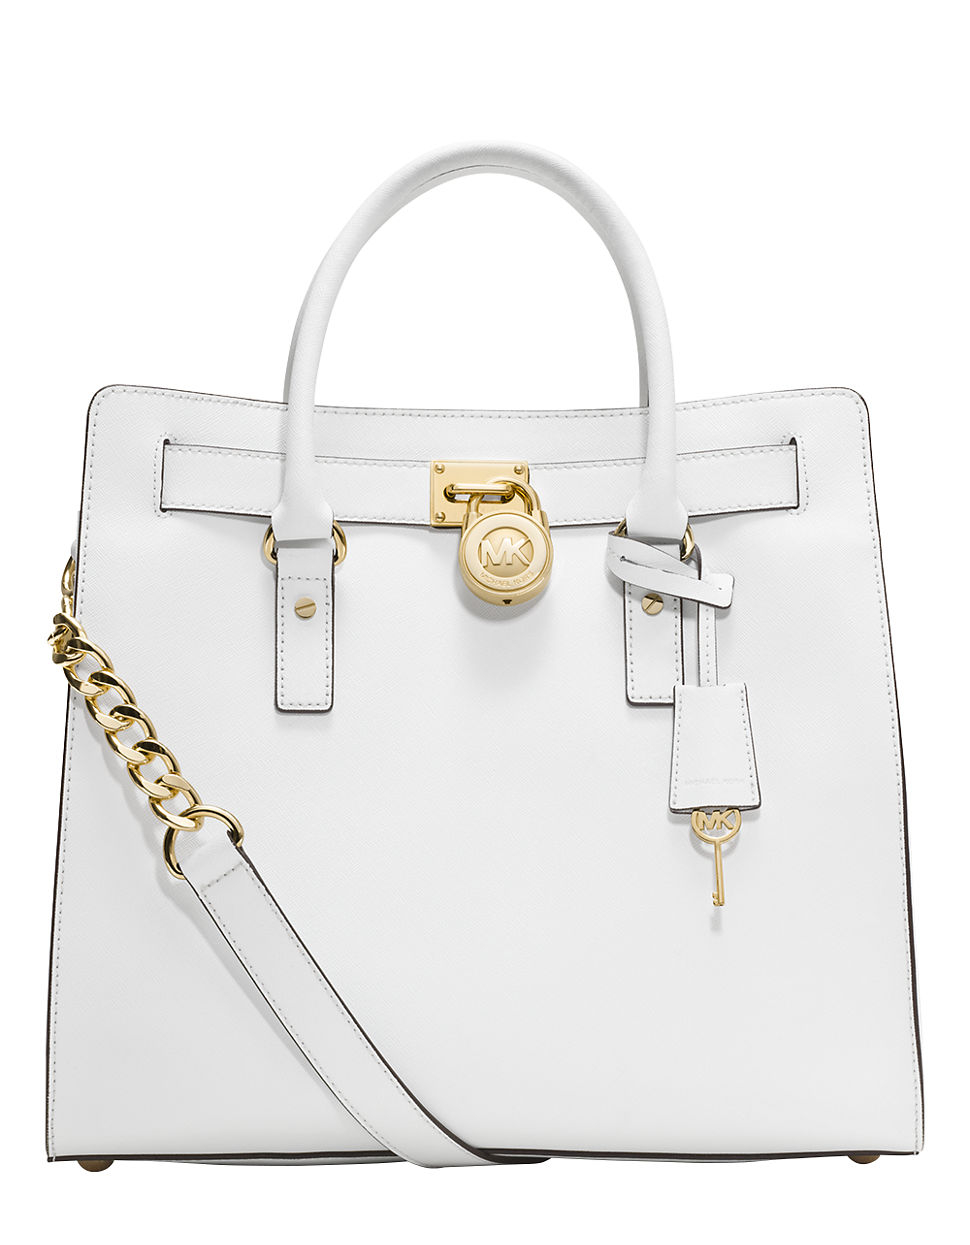 Lyst - Michael Michael Kors Hamilton Large Leather Tote Bag in White